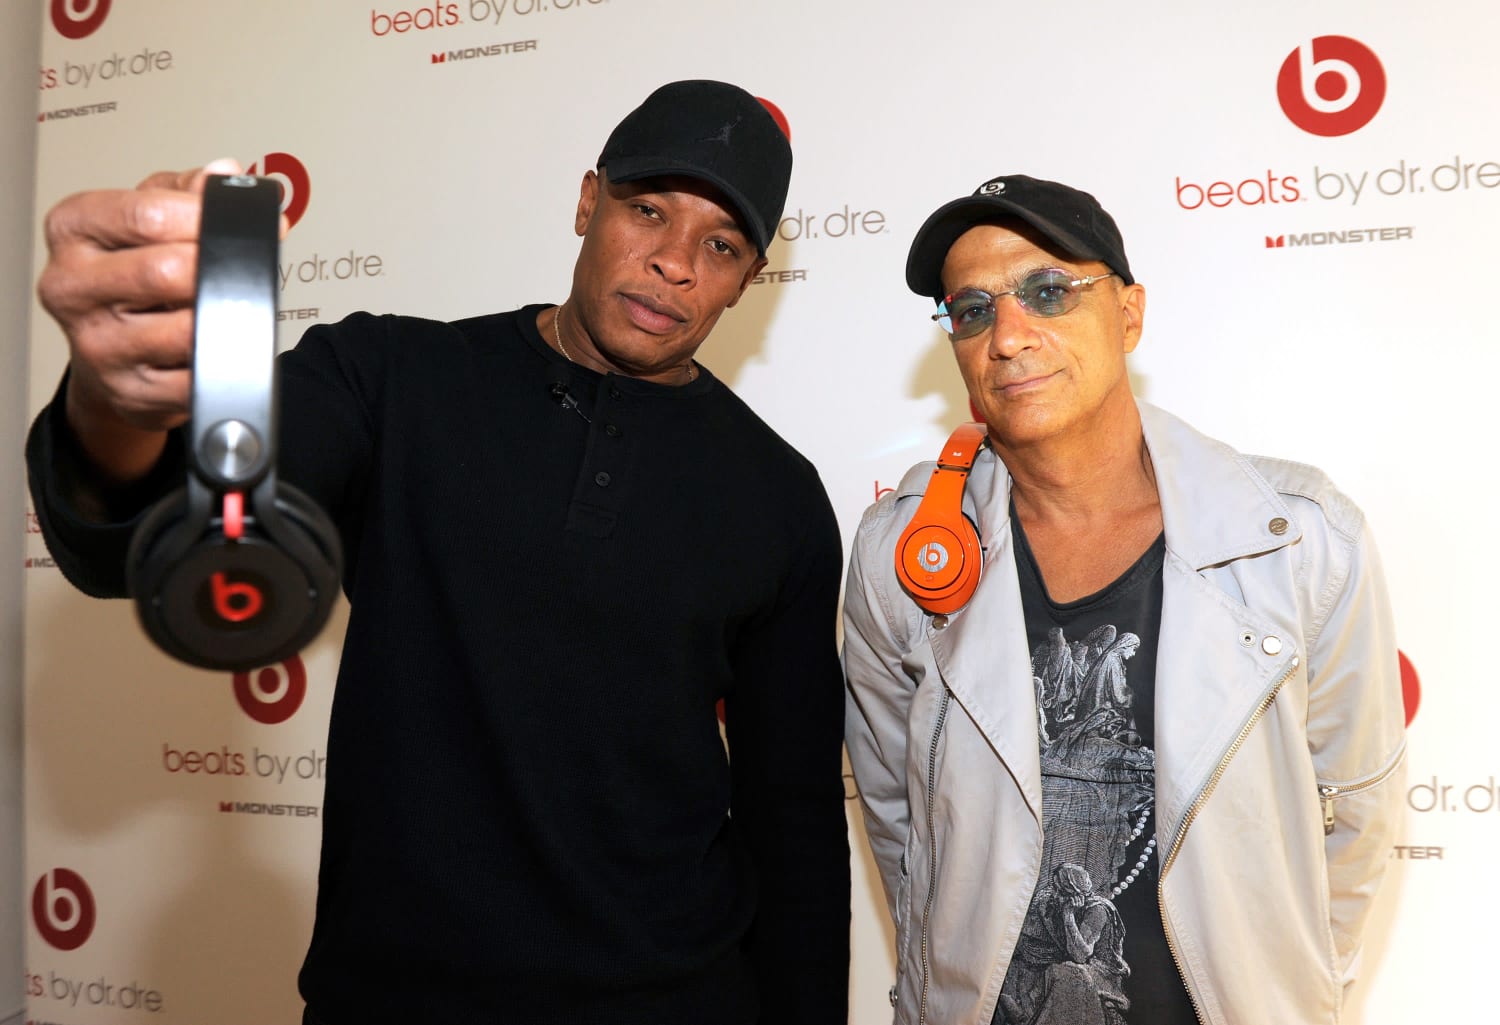 How Beats By Dre became a multi-billion dollar brand